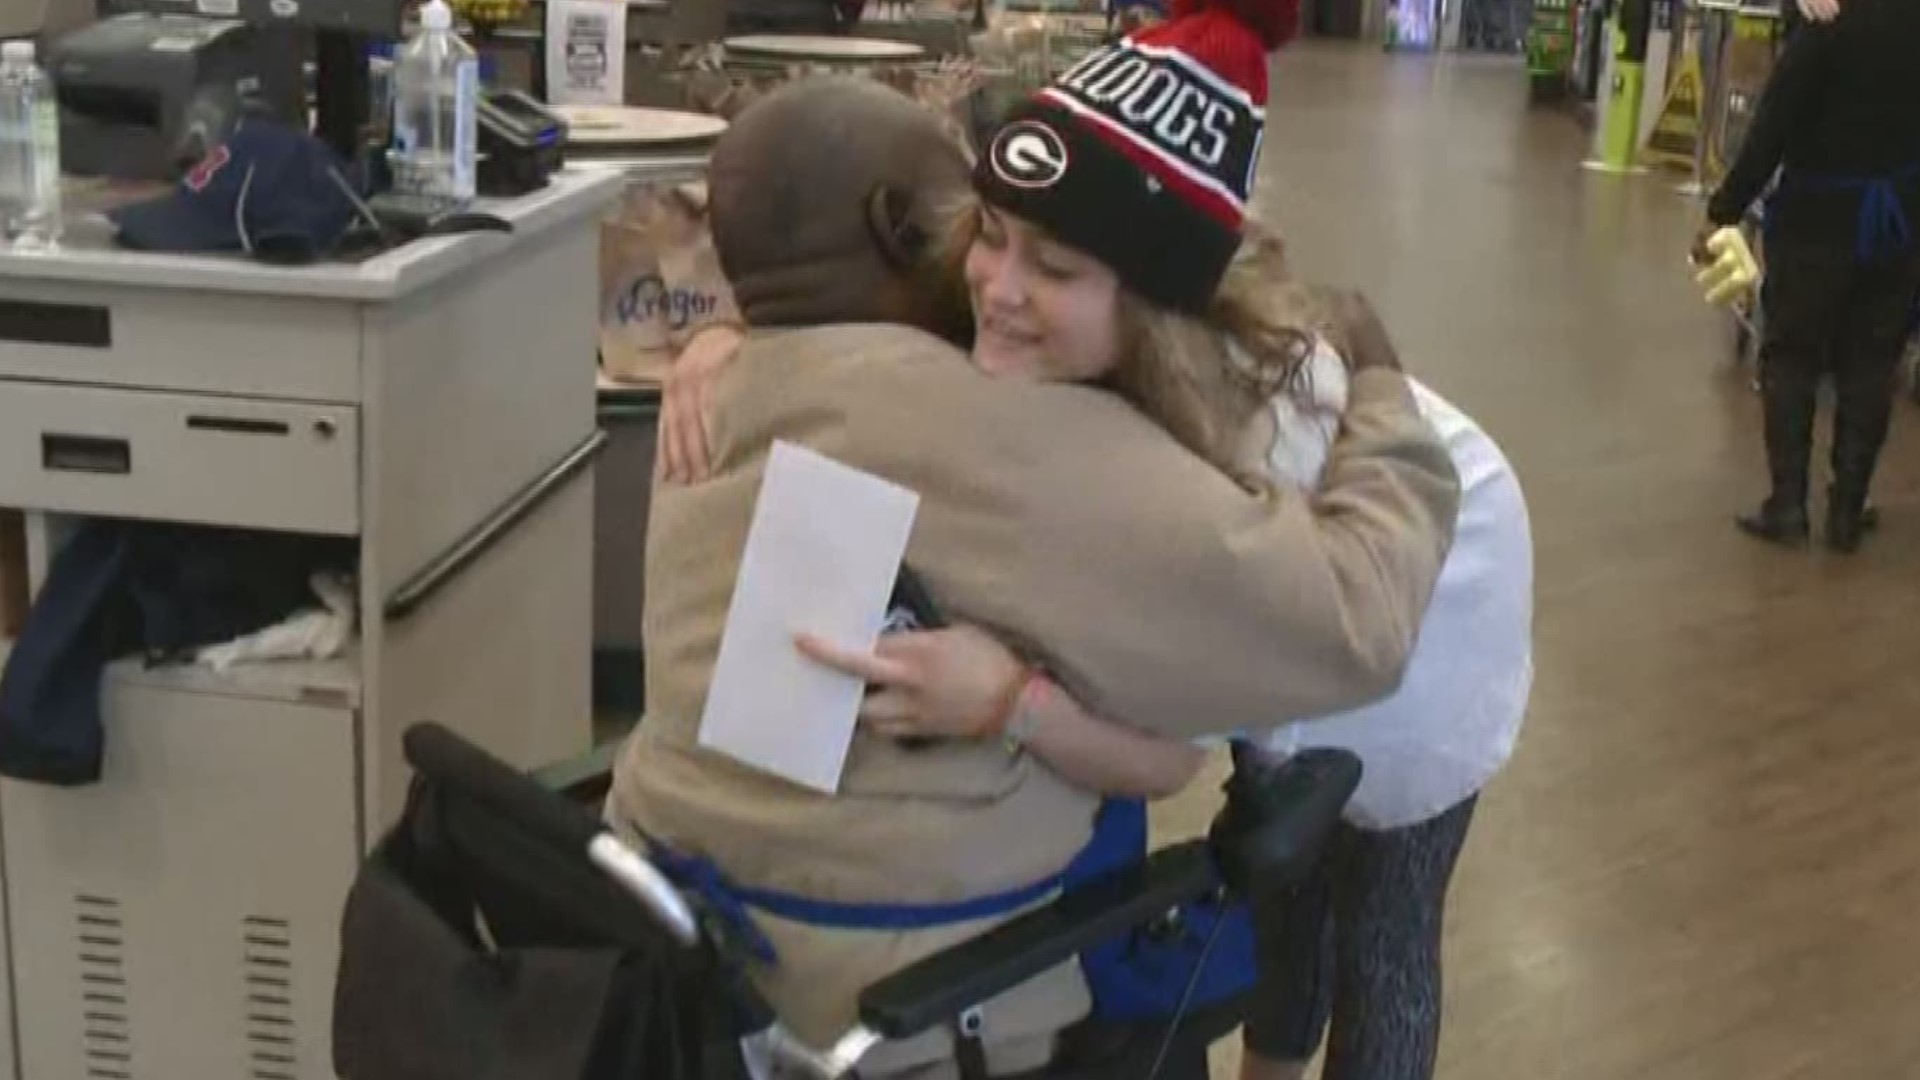 She dropped of a second check Thursday that has enough money for him to buy a second battery for the wheelchair.